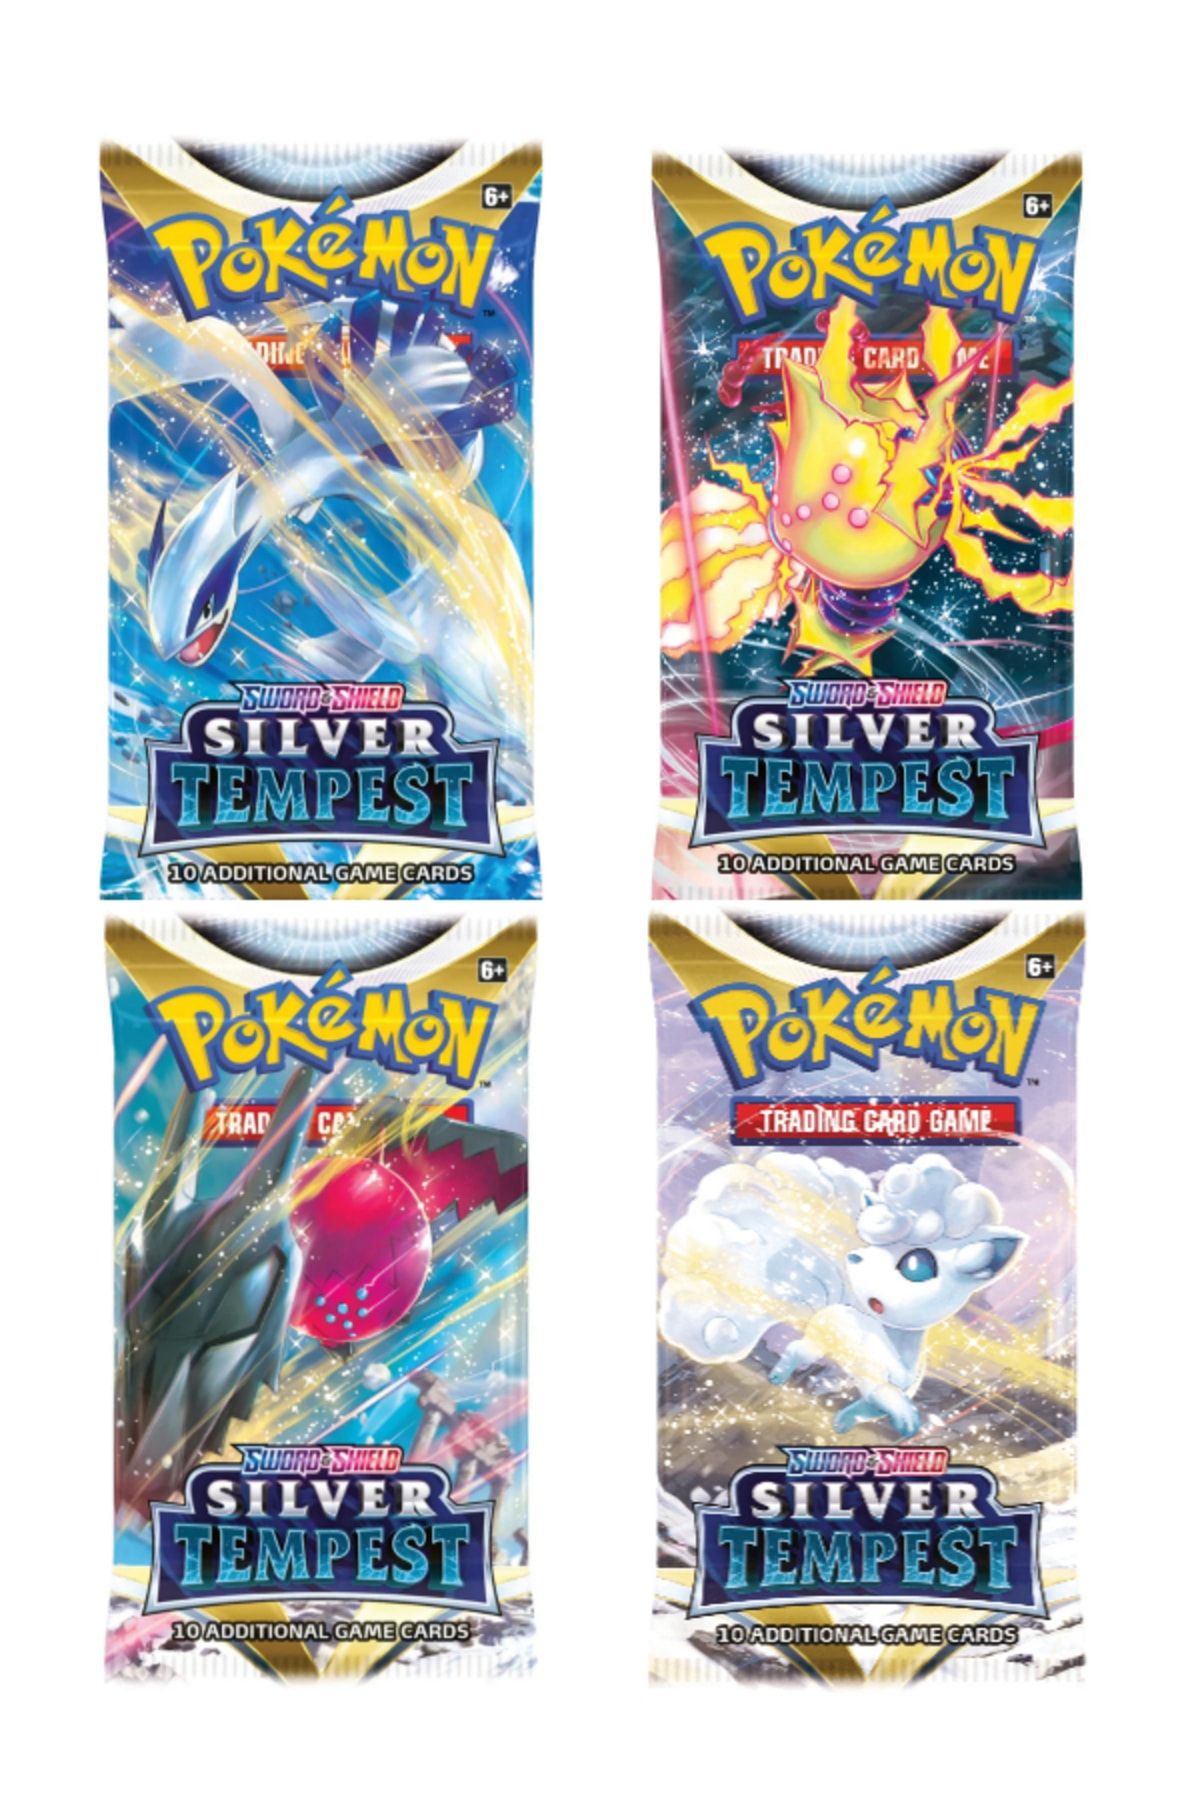 Pokemon Cards - Sword & Shield: Silver Tempest - BOOSTER PACK (10 Cards)